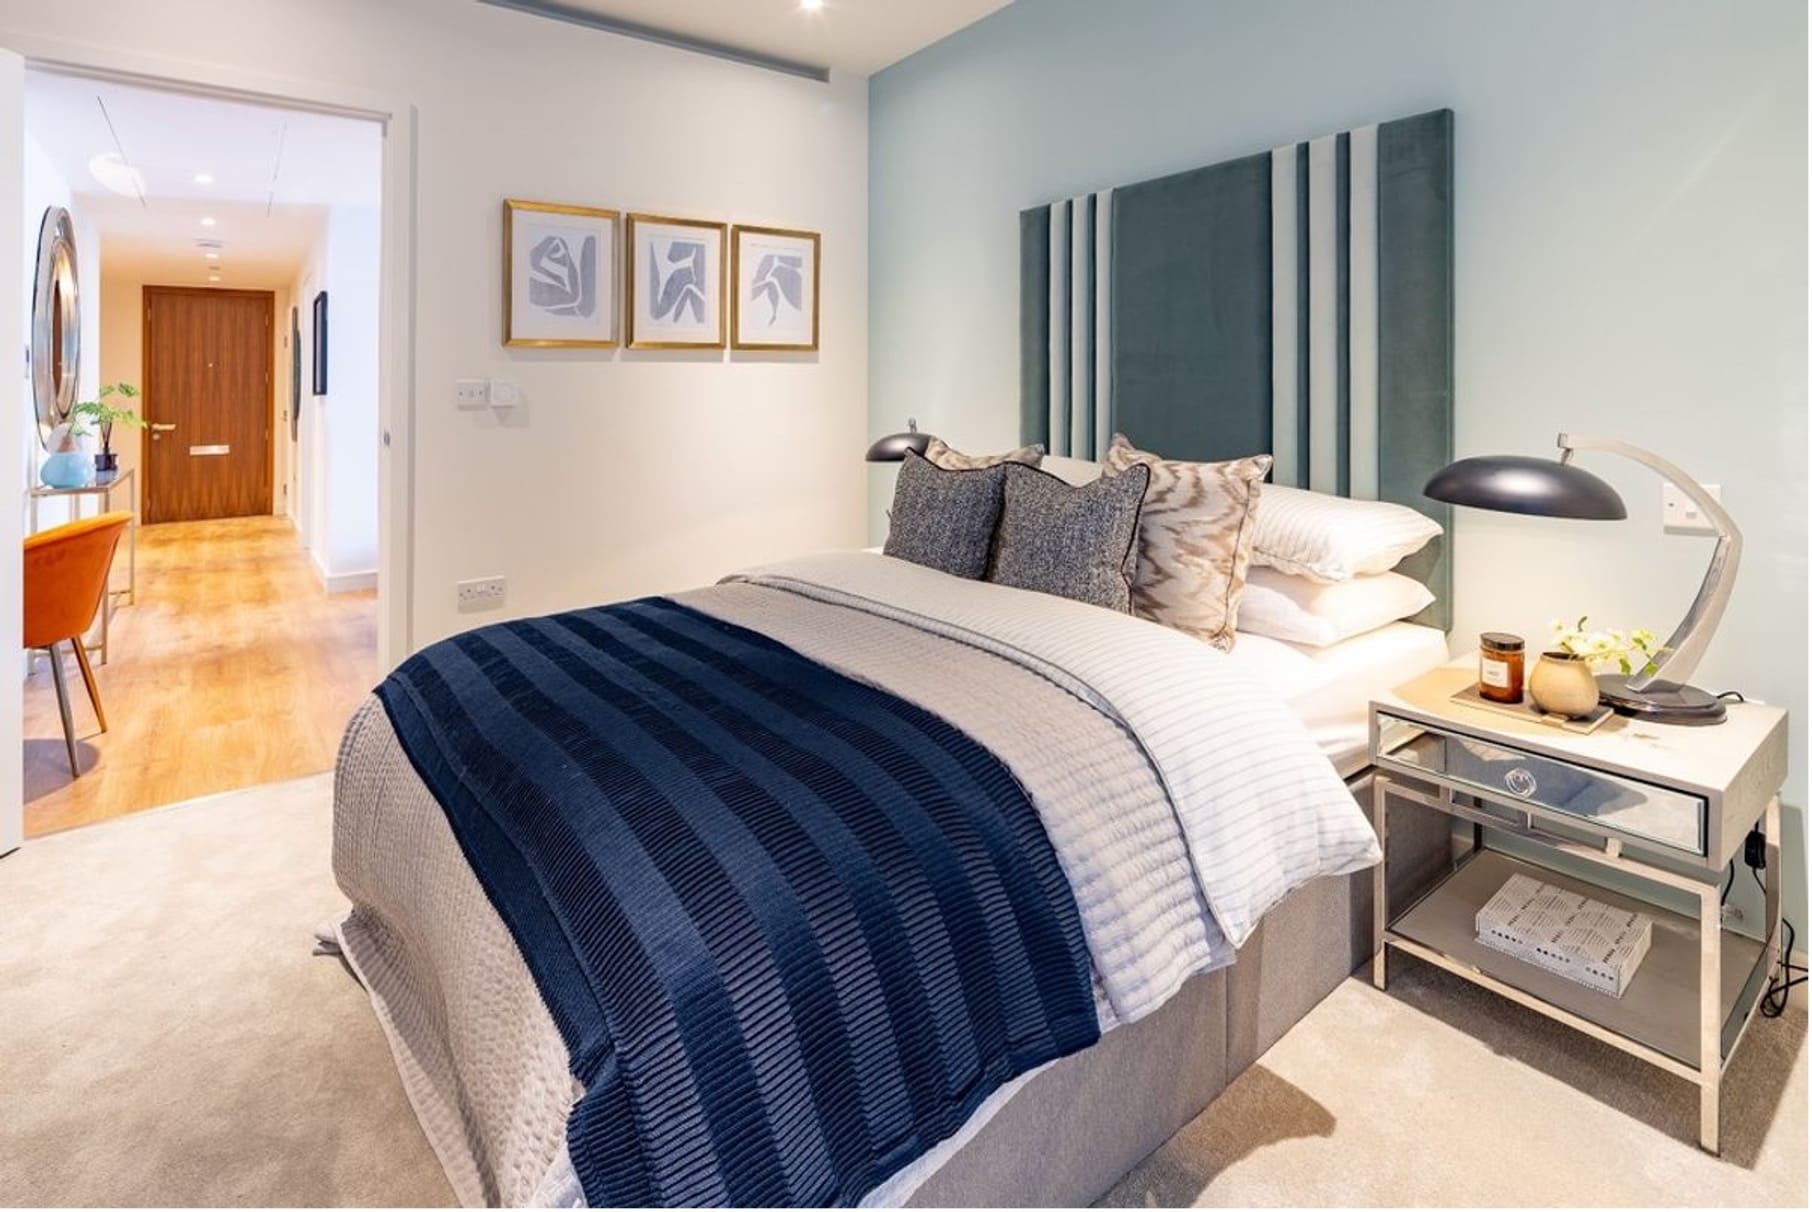 The bedroom of one of the top Shared Ownership properties in London, Hampton Tower at SQP, Tower Hamlets